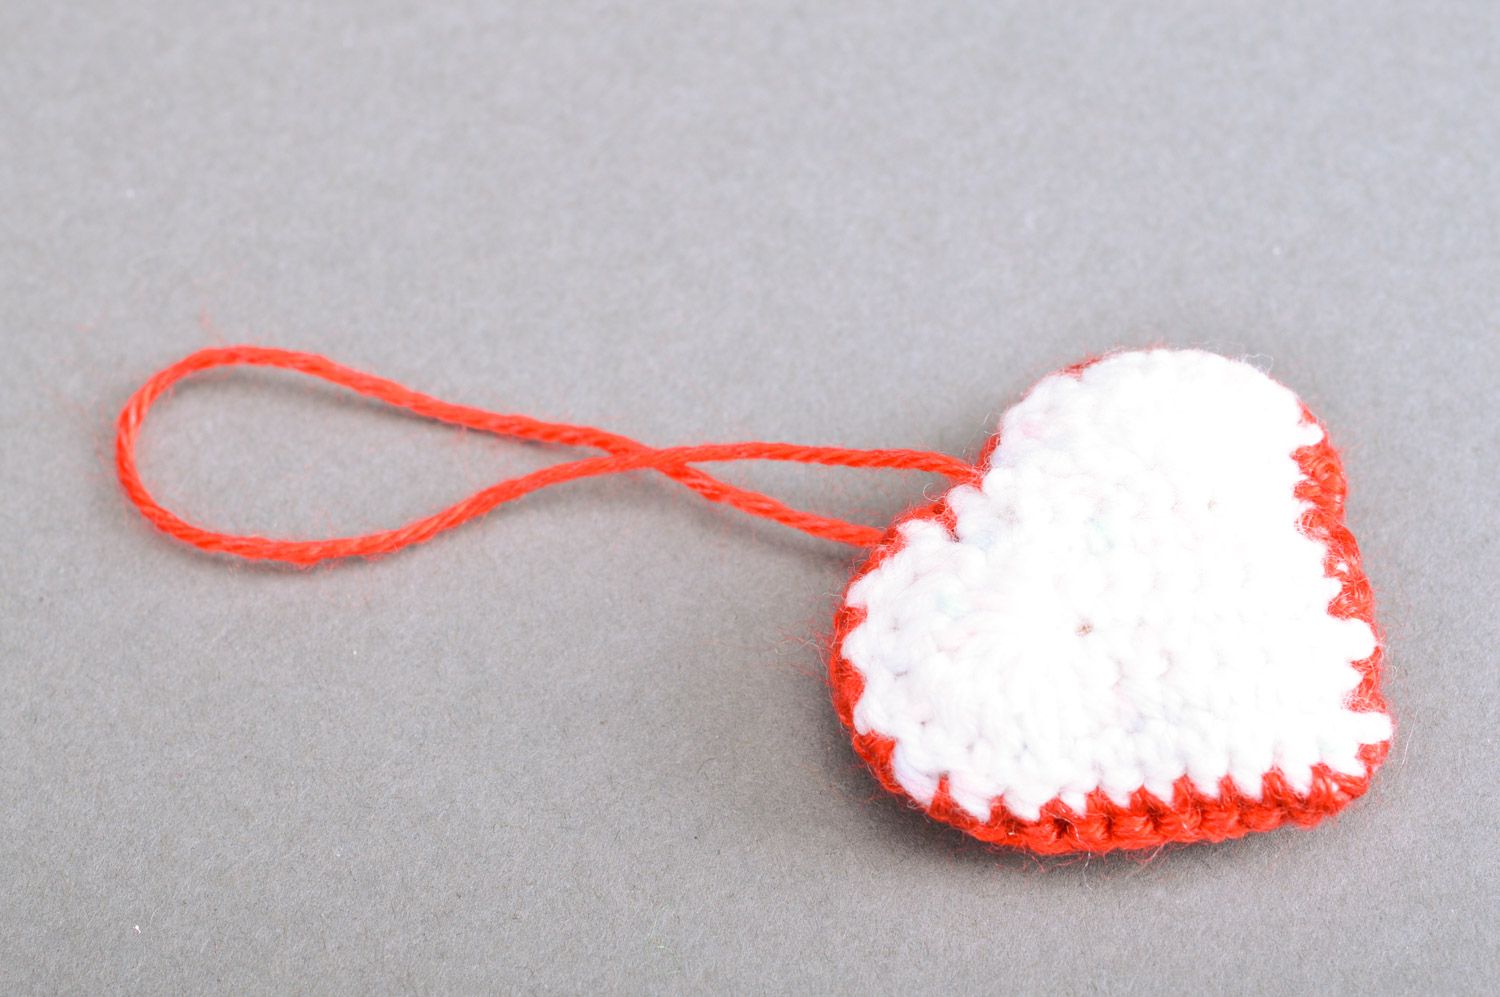 Handmade crochet interior wall hanging decoration Heart in red and white colors photo 2